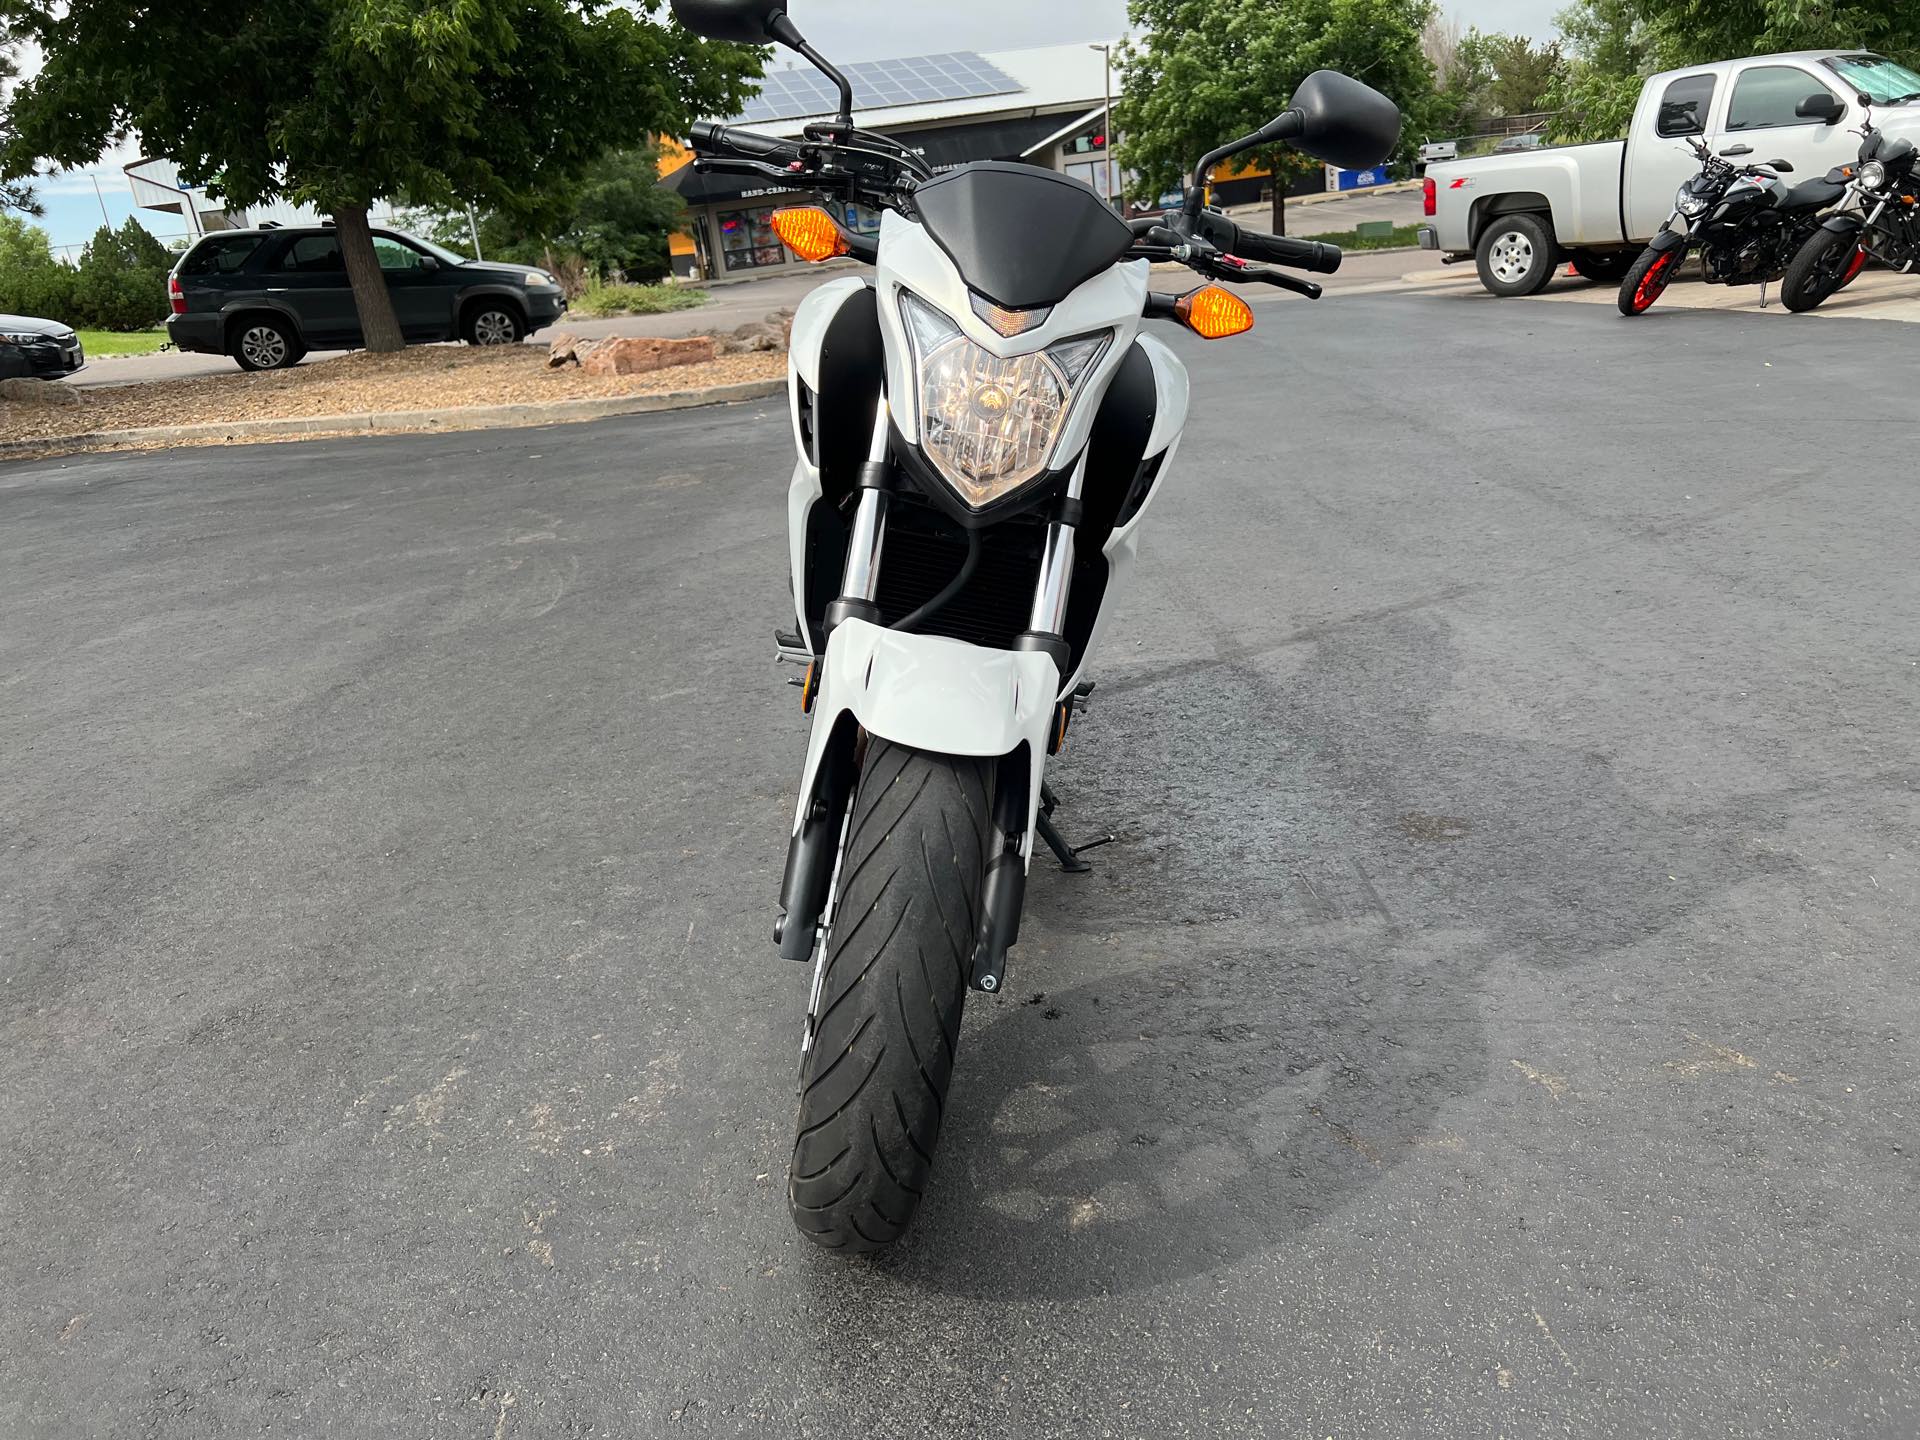 2014 Honda CB 500F at Aces Motorcycles - Fort Collins